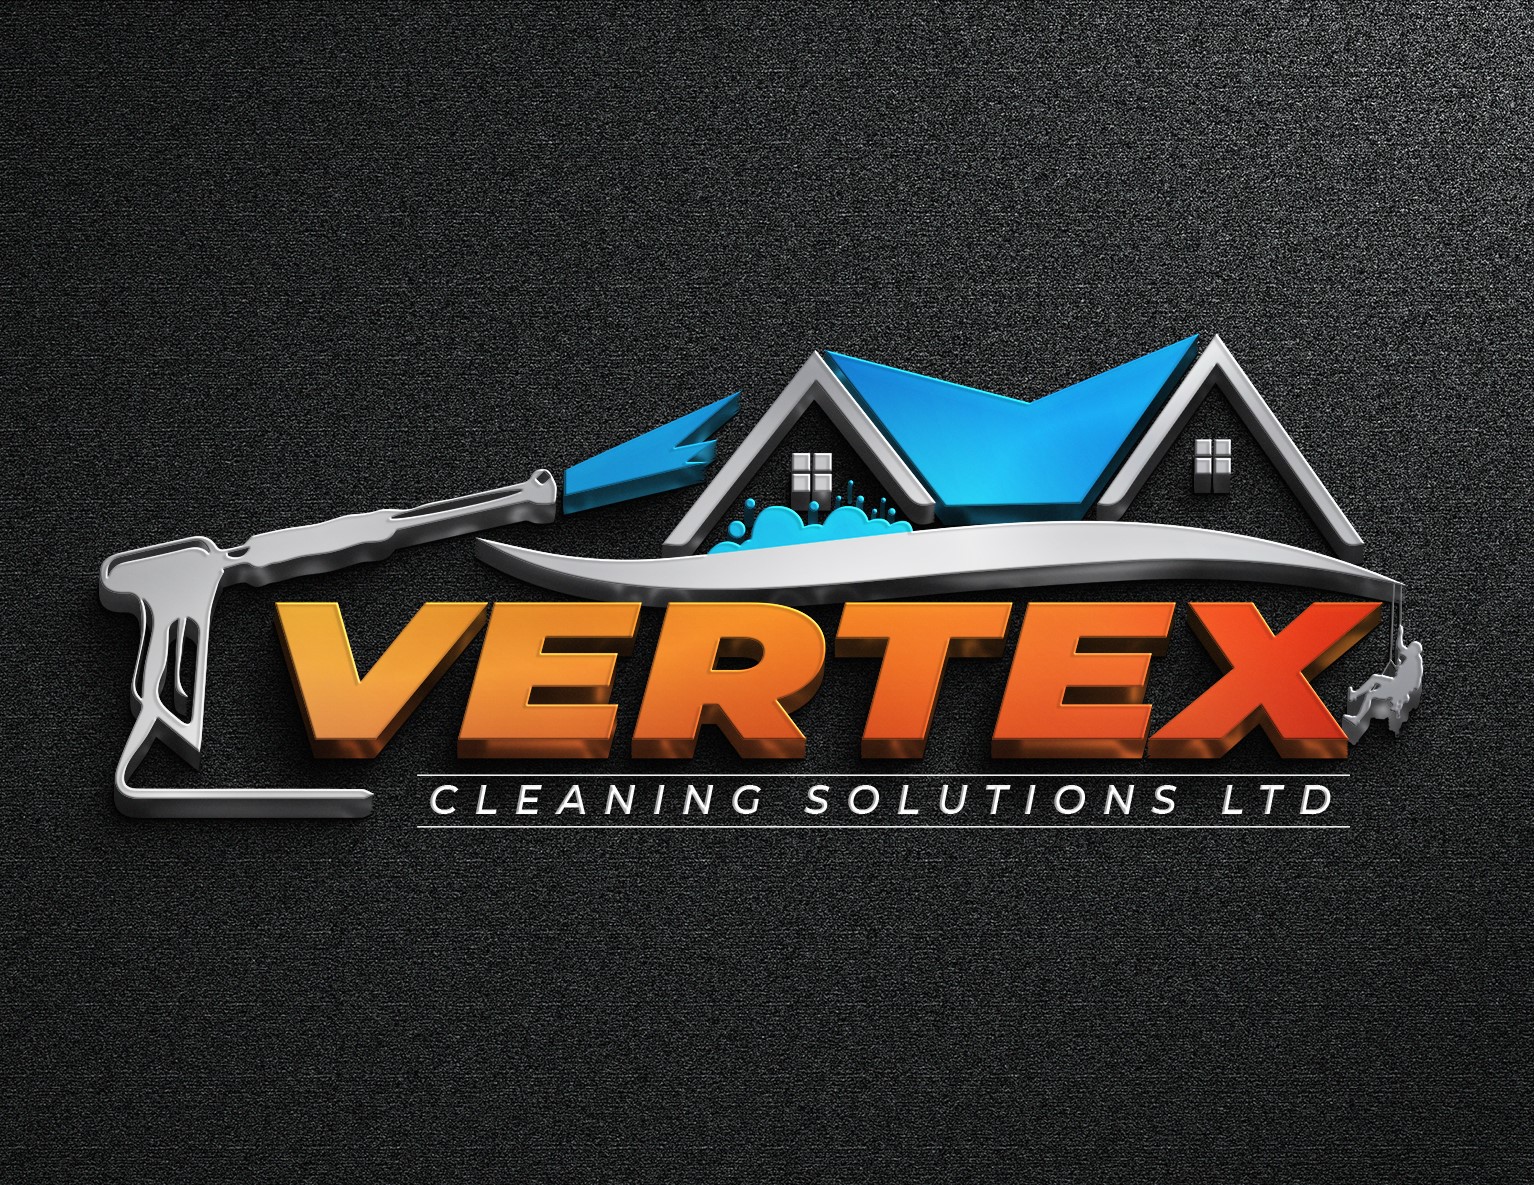 Vertex Cleaning Solutions - Trusted Roof and Exterior Cleaning